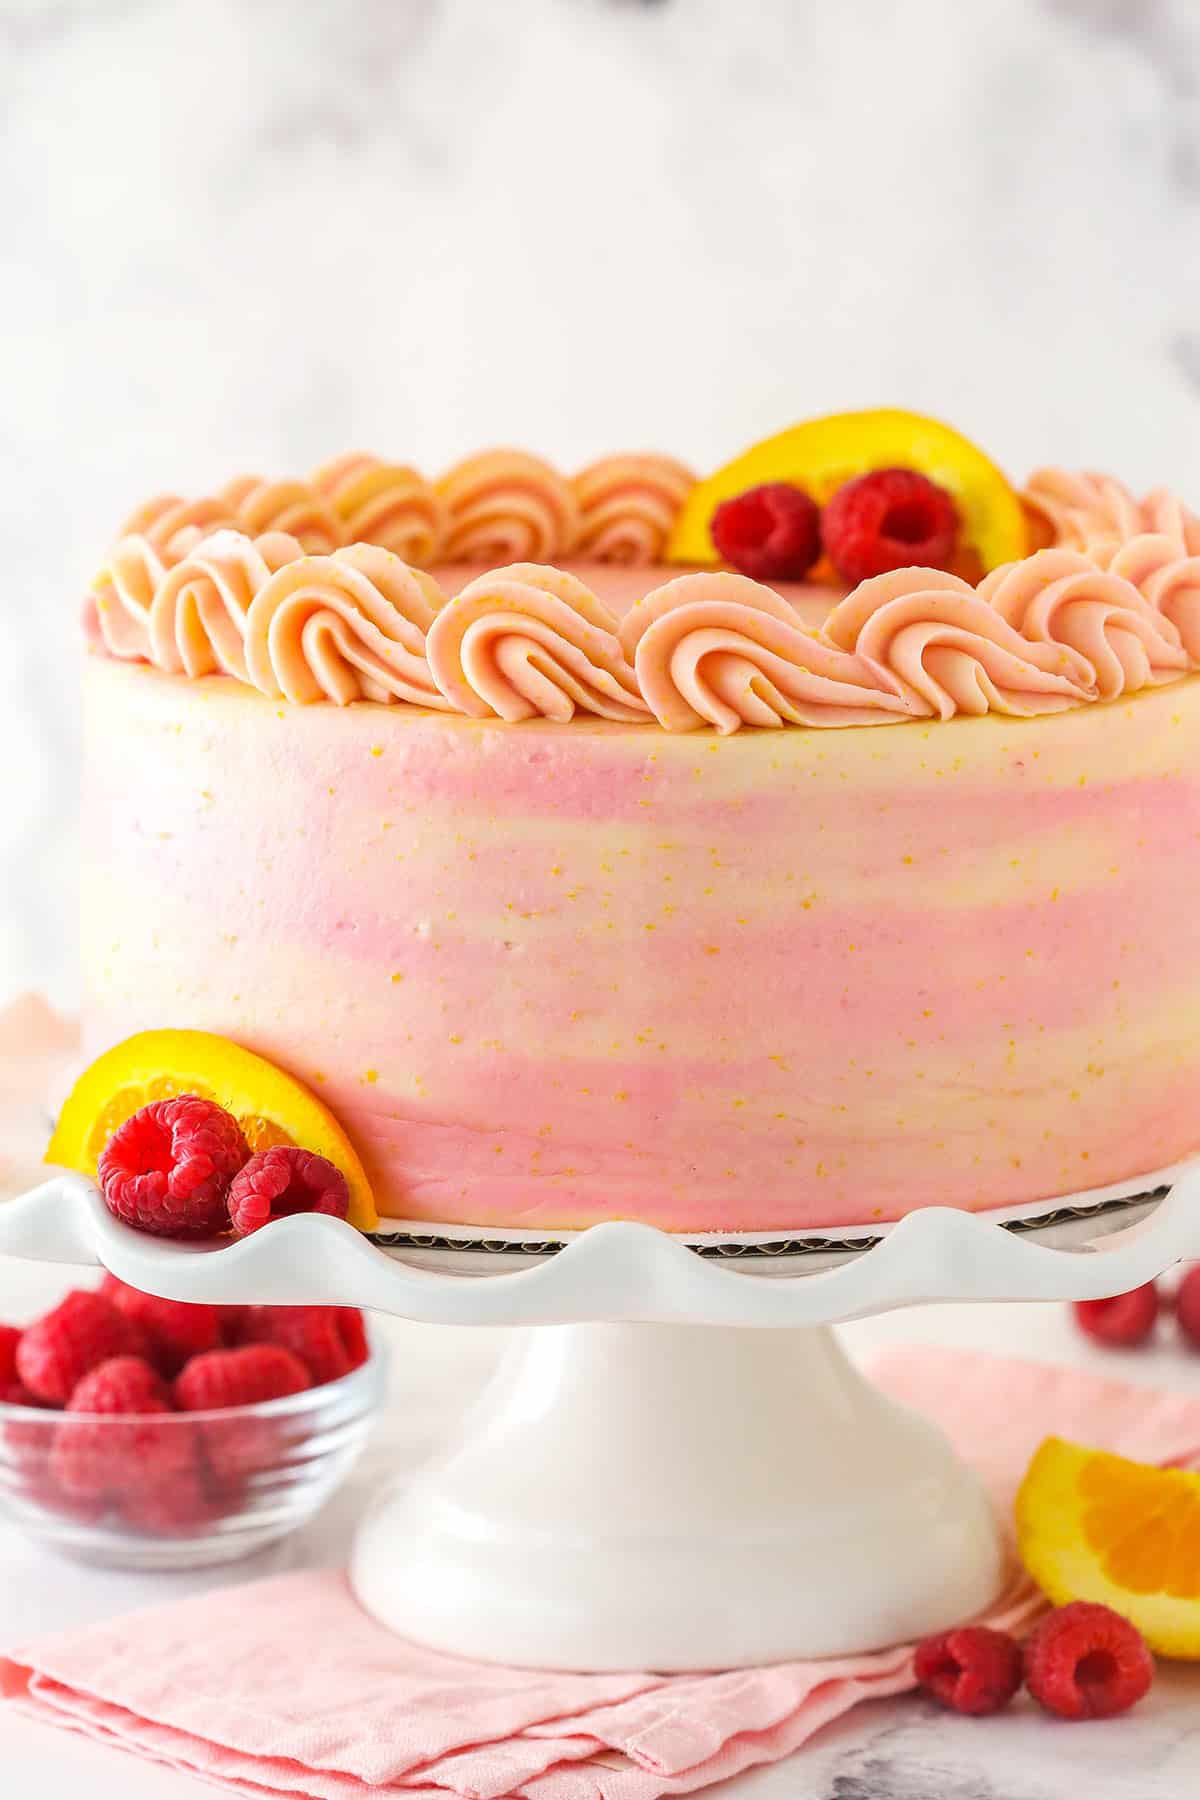 Raspberry orange layer cake on a cake stand with fresh raspberries and orange slices nearby.